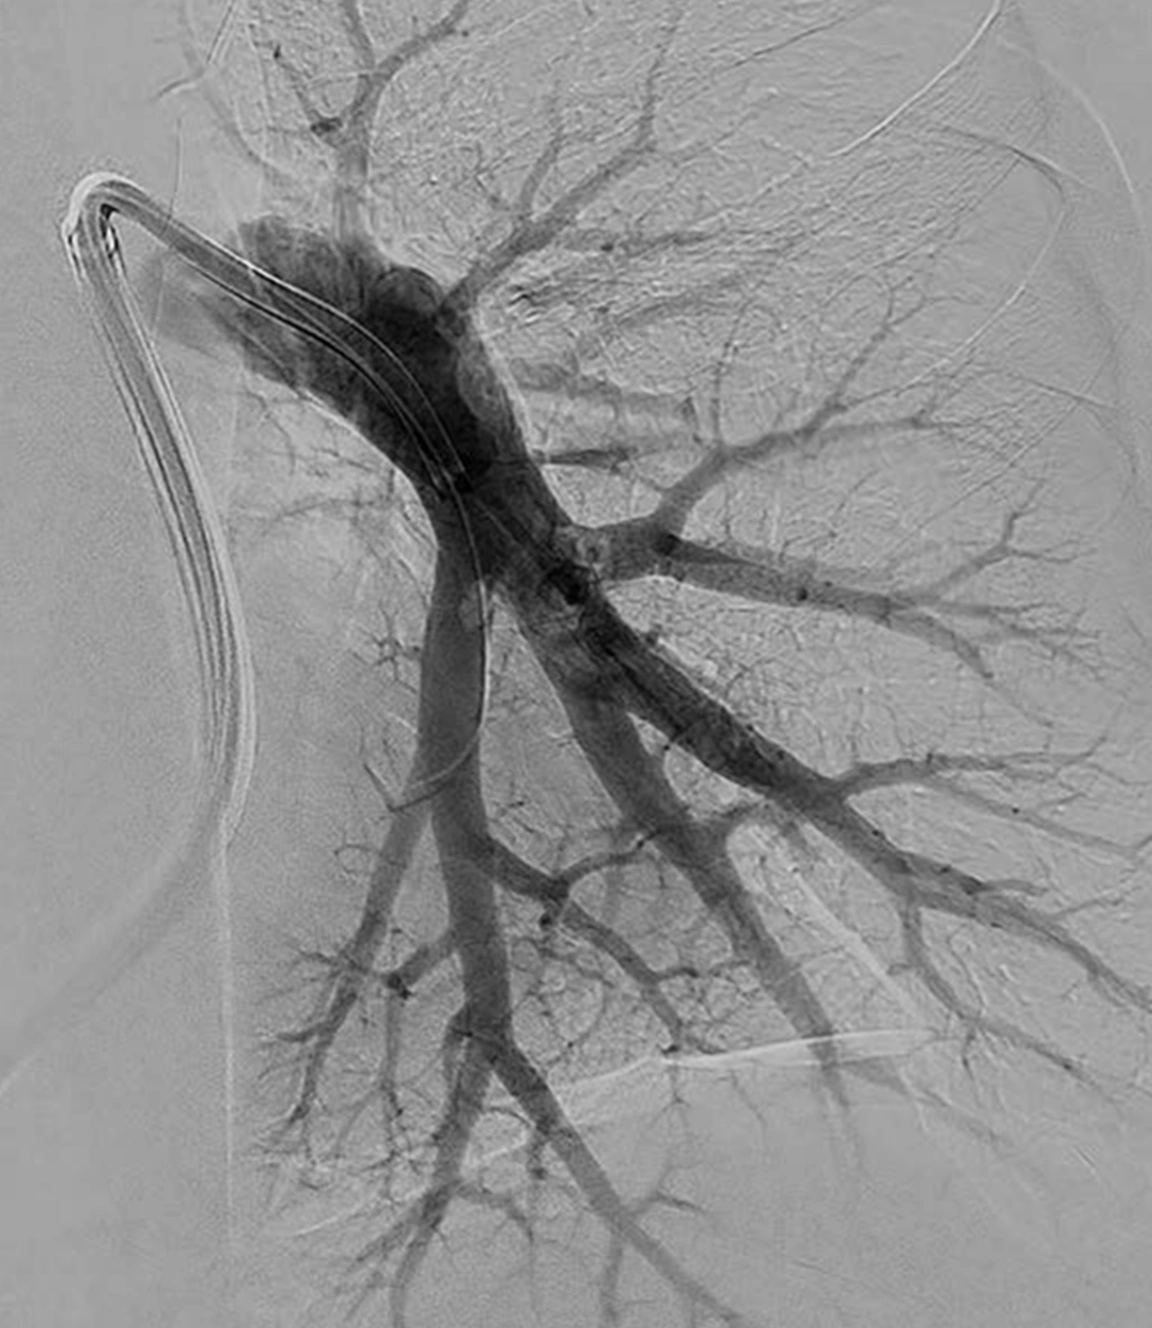 Angiogram of restored blood flow in left lung post computer-aided thrombectomy with Lightning 12